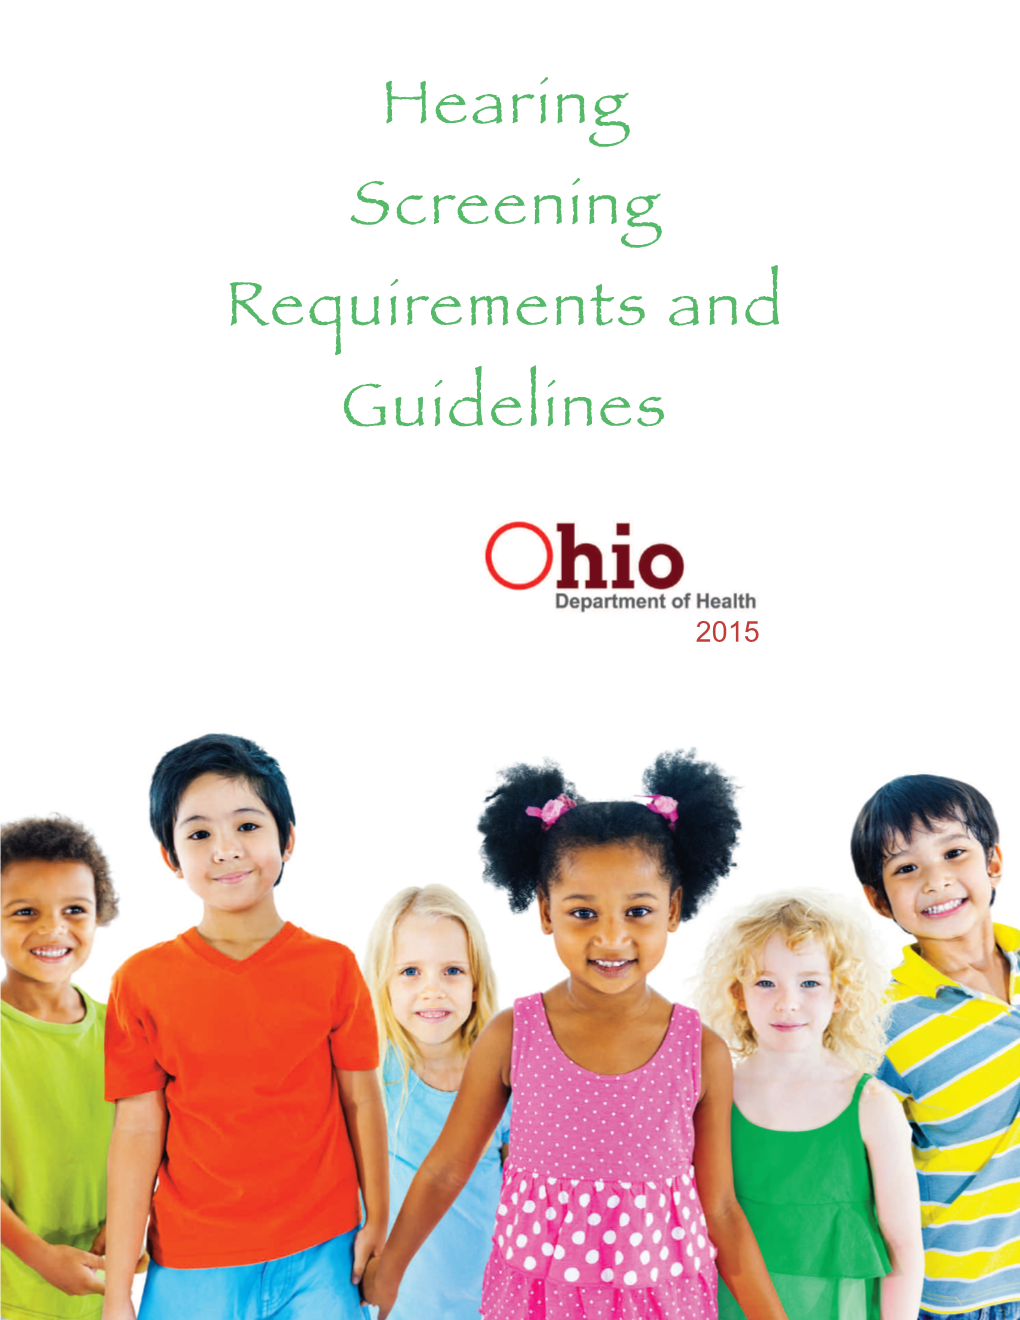 Hearing Screening Requirements and Guidelines